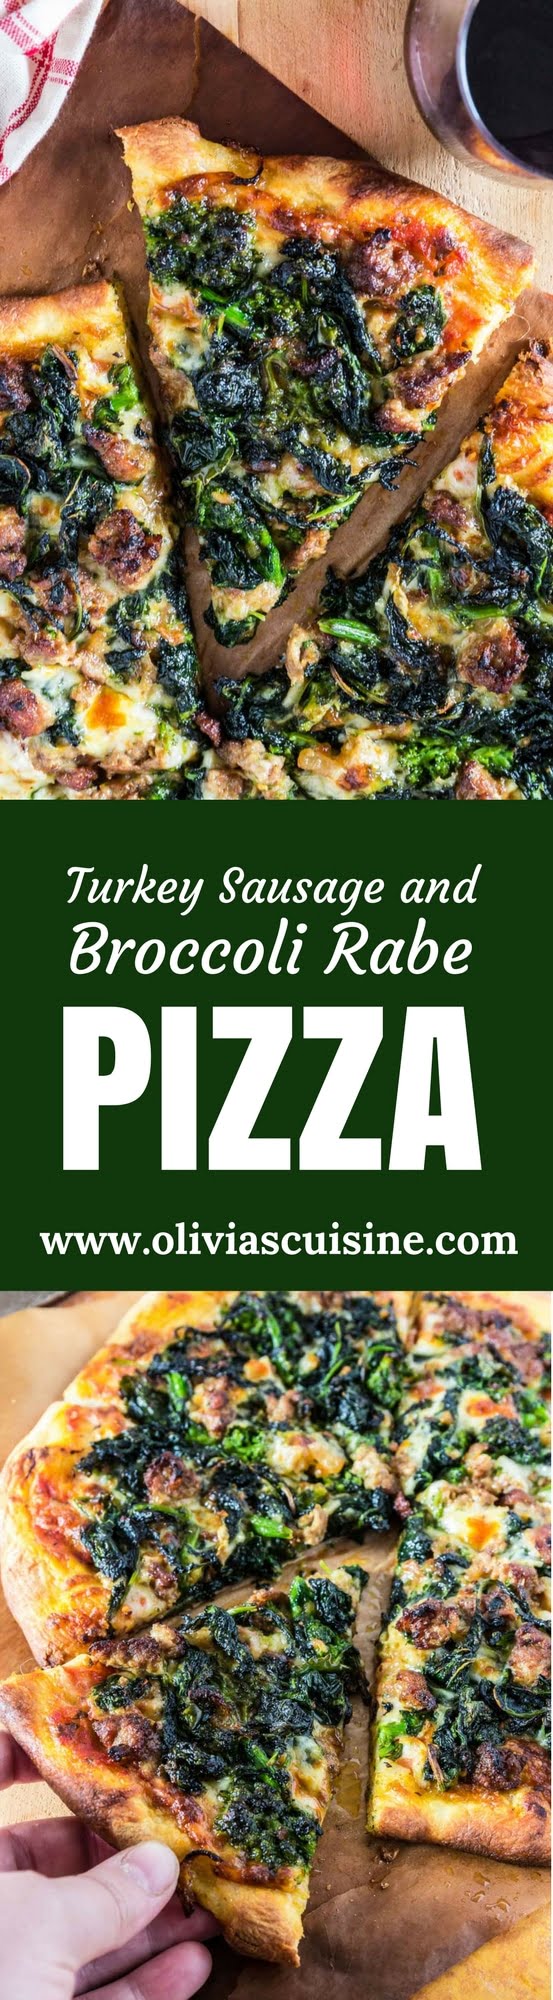 Turkey Sausage and Broccoli Rabe Pizza | www.oliviascuisine.com | This Turkey Sausage and Broccoli Rabe Pizza is one of the best pizzas you will ever taste. The slightly bitter and peppery broccoli rabe combined with the smokiness of the provolone cheese and the subtle sweetness from the turkey sausage create an explosion of flavor that will wow even those who turn their noses at broccoli rabe. You simply must try this! (Recipe by @oliviascuisine).